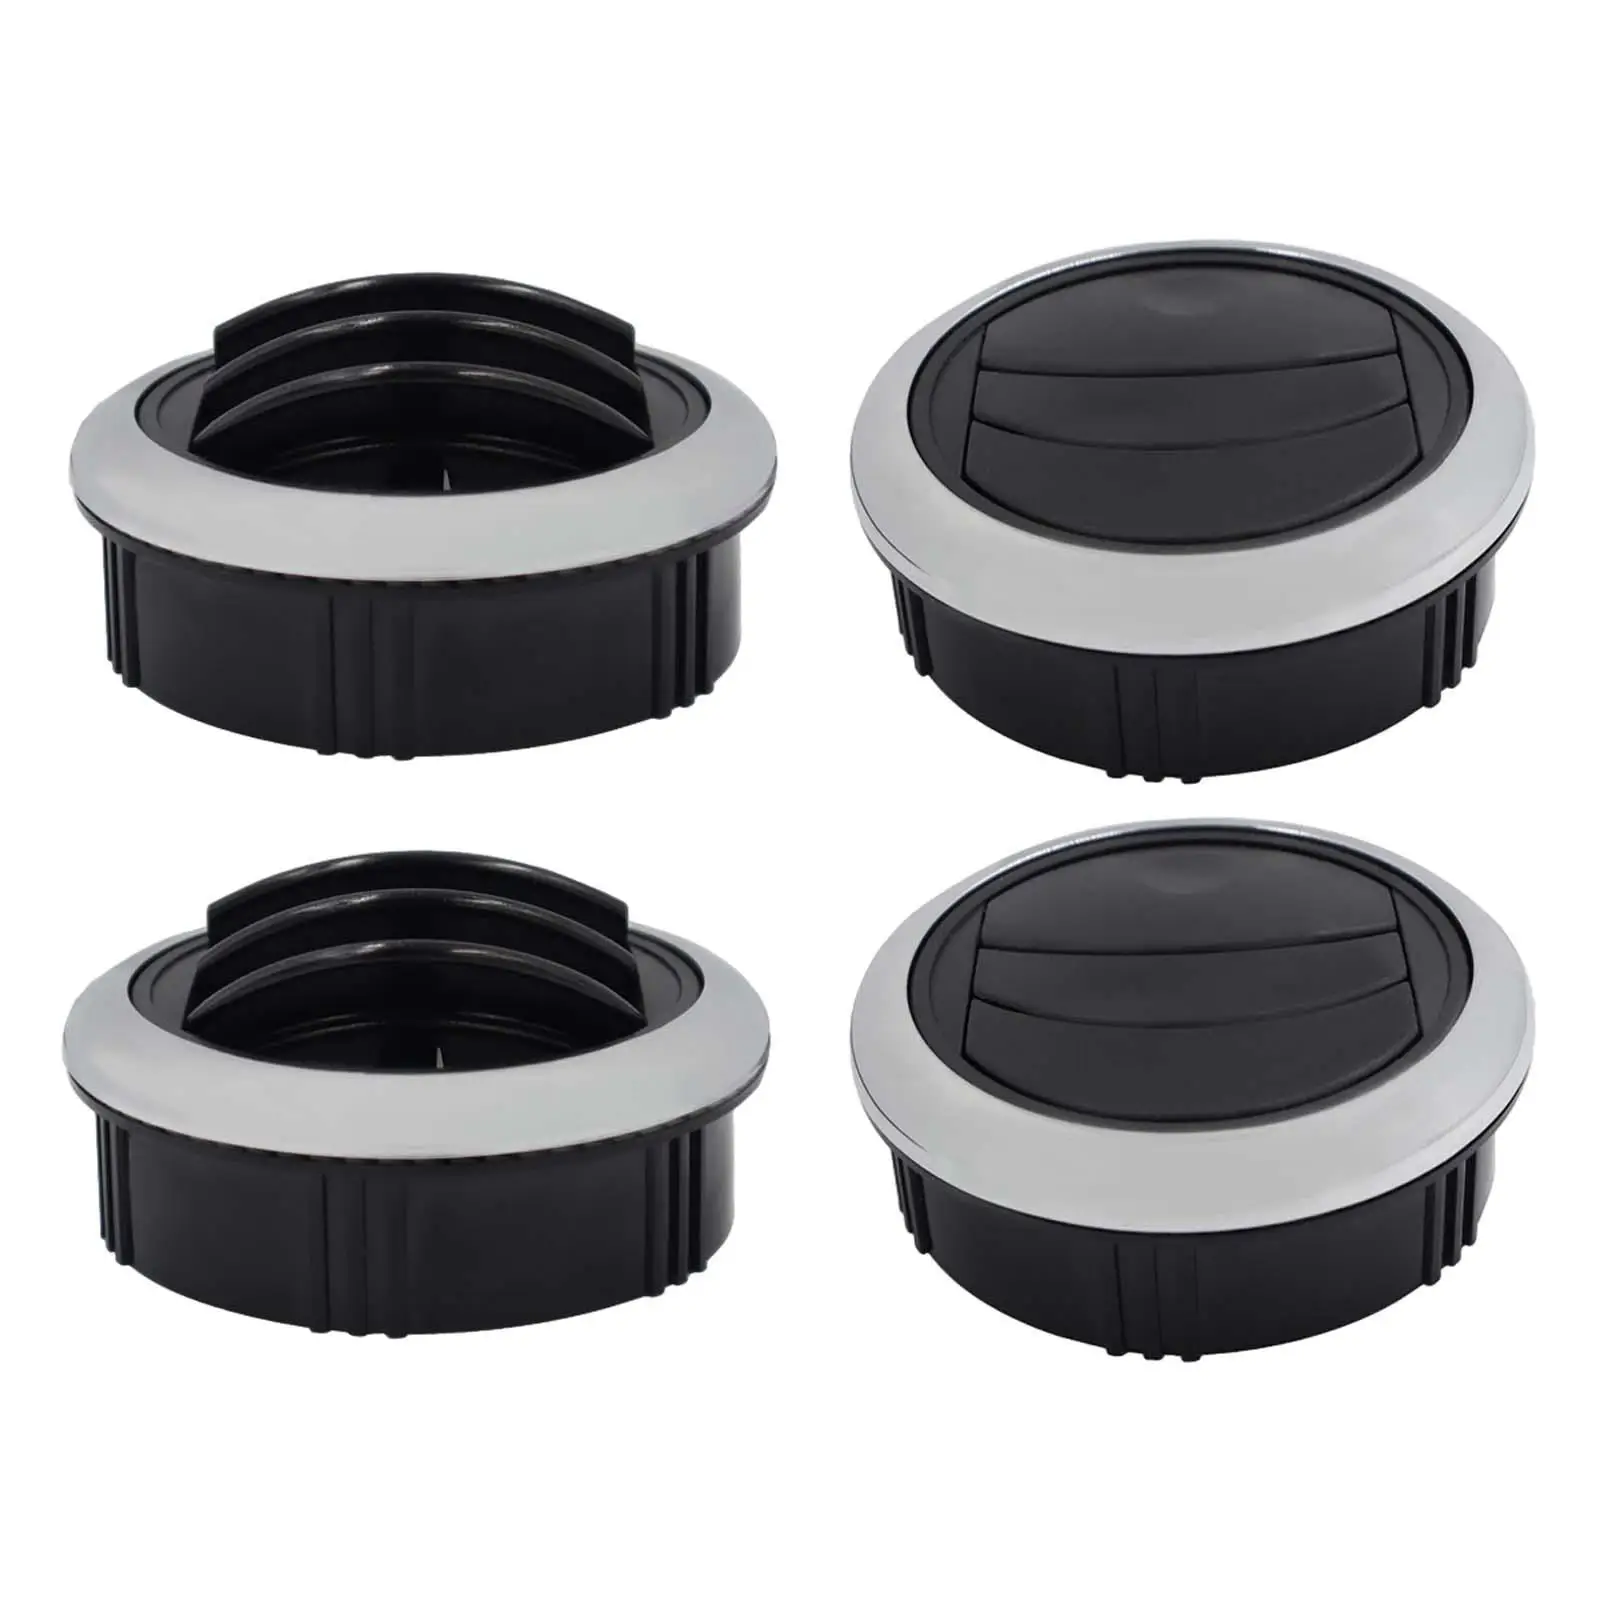 4 Pieces RV Boat Yht Dashboard Air Vent Round for Bus Marine Yht